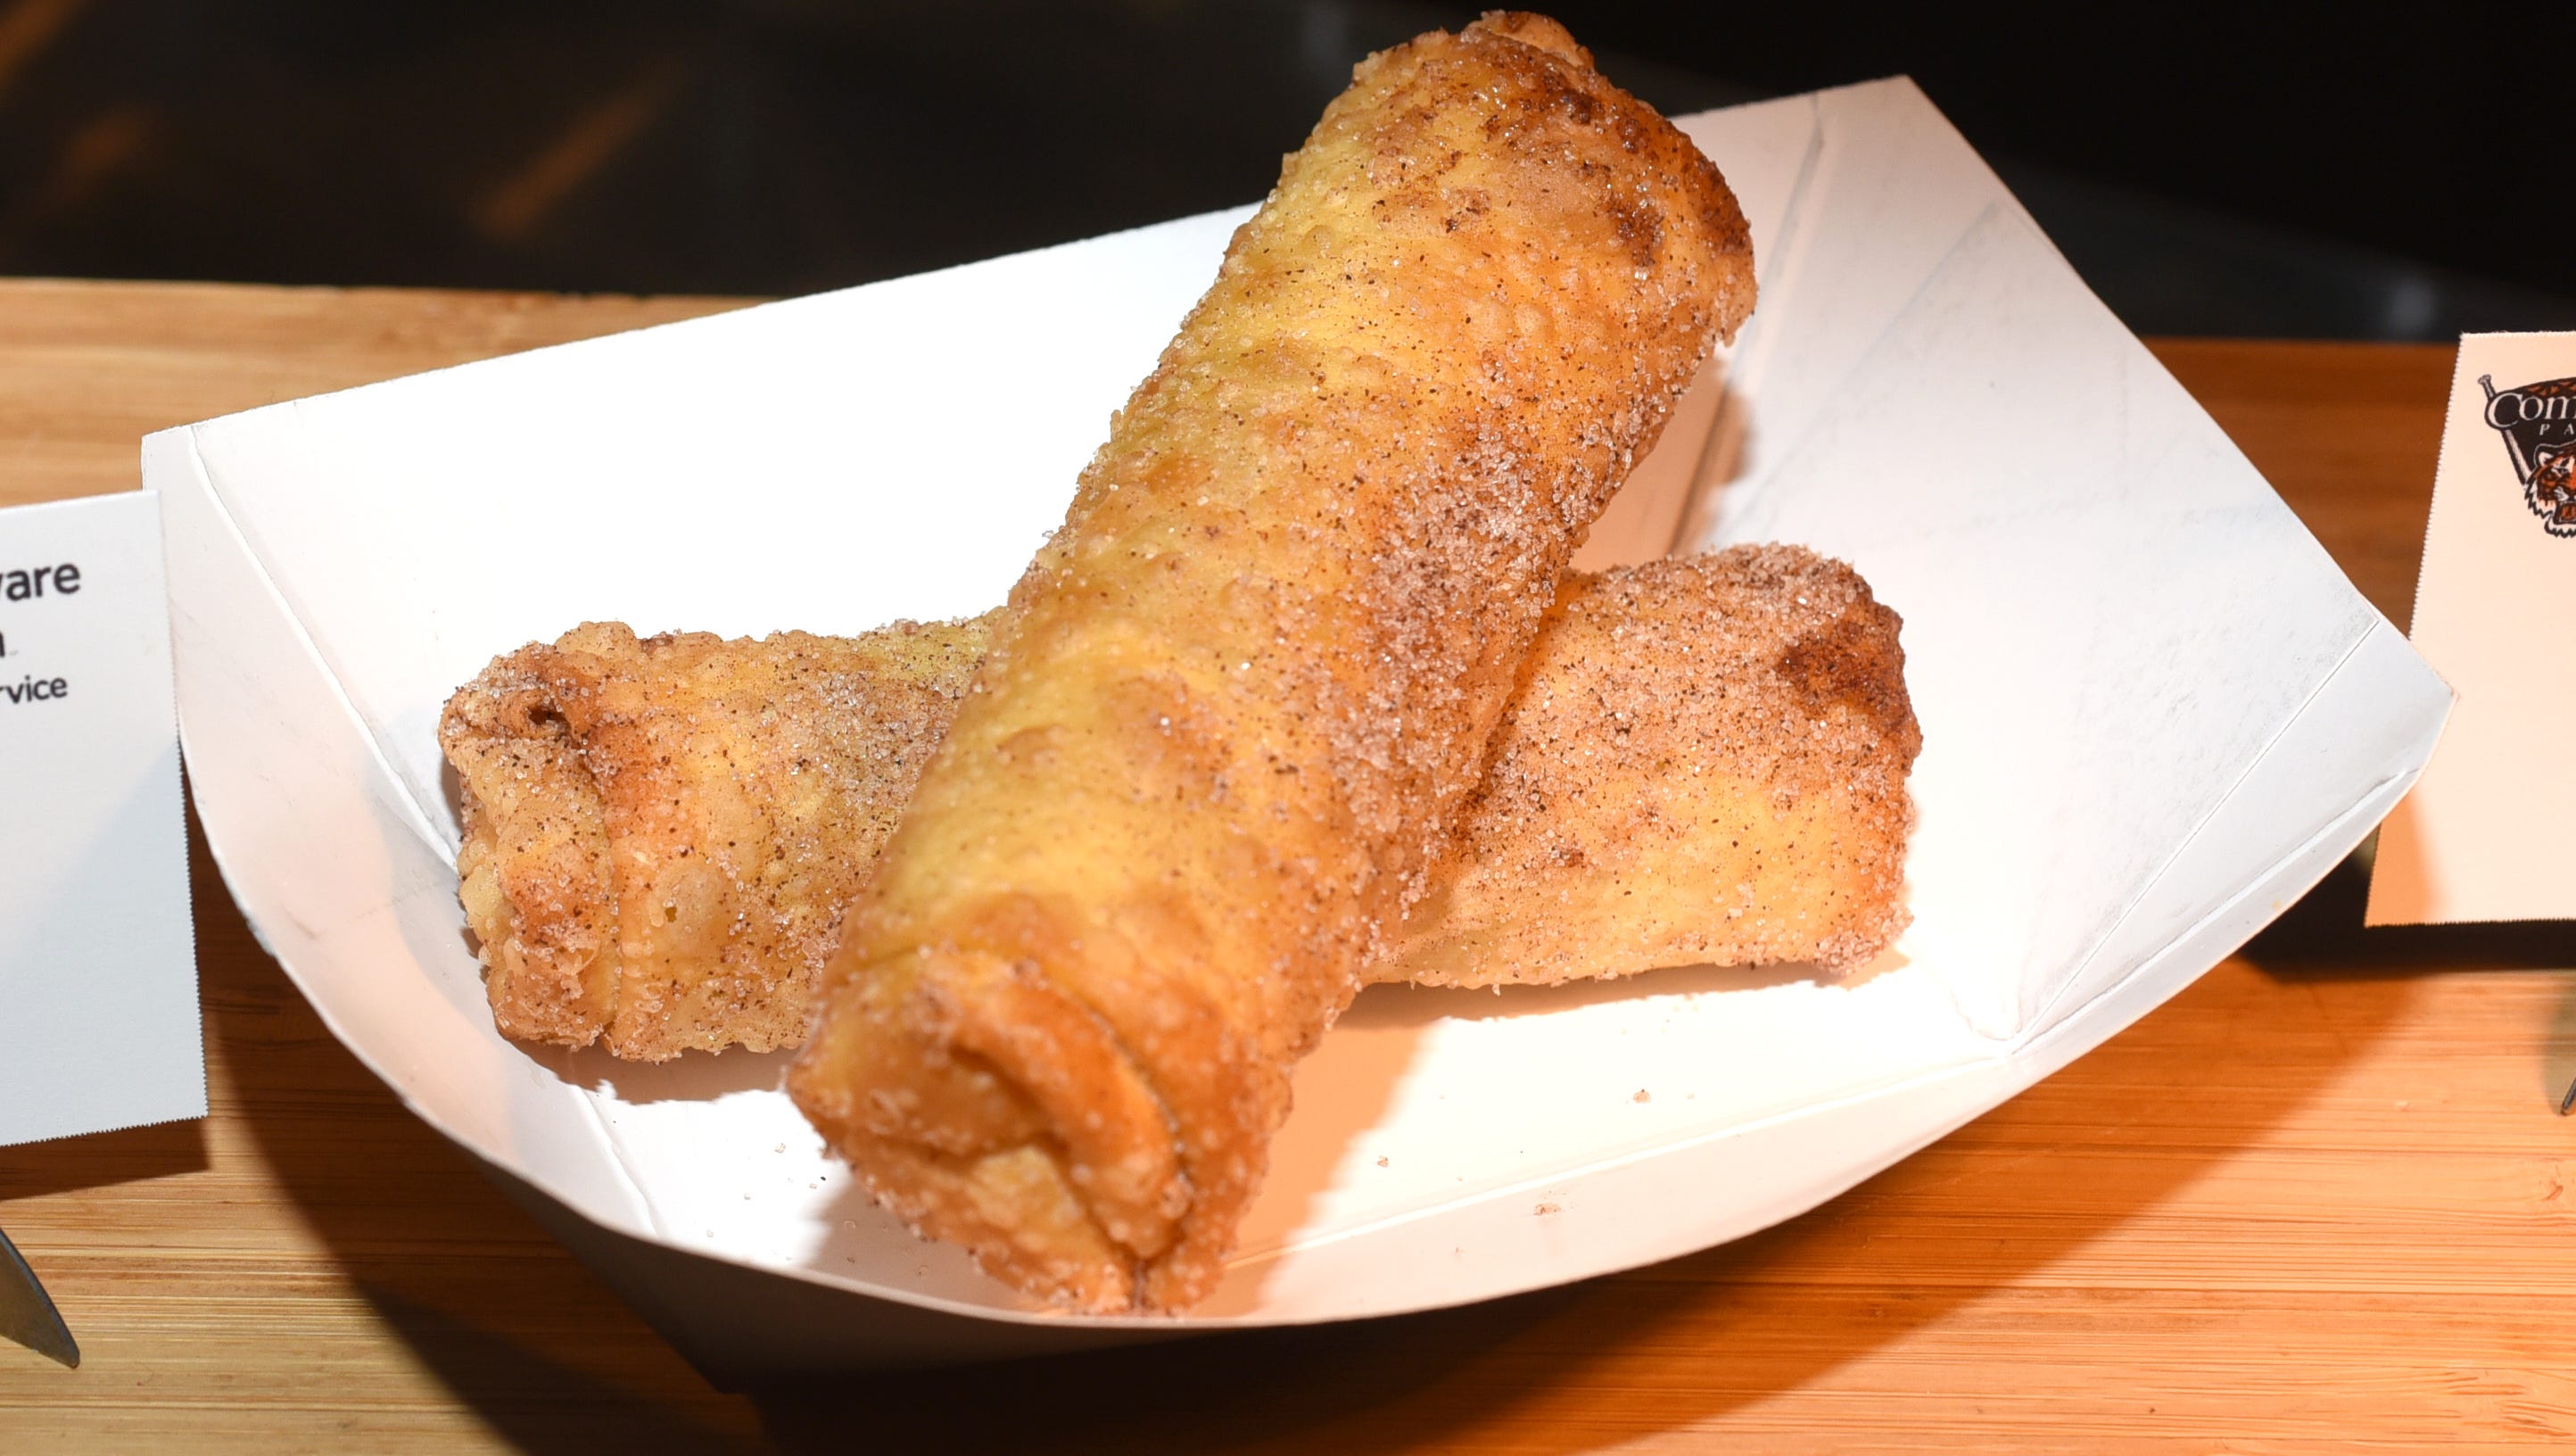 The Apple Egg Roll is shown.